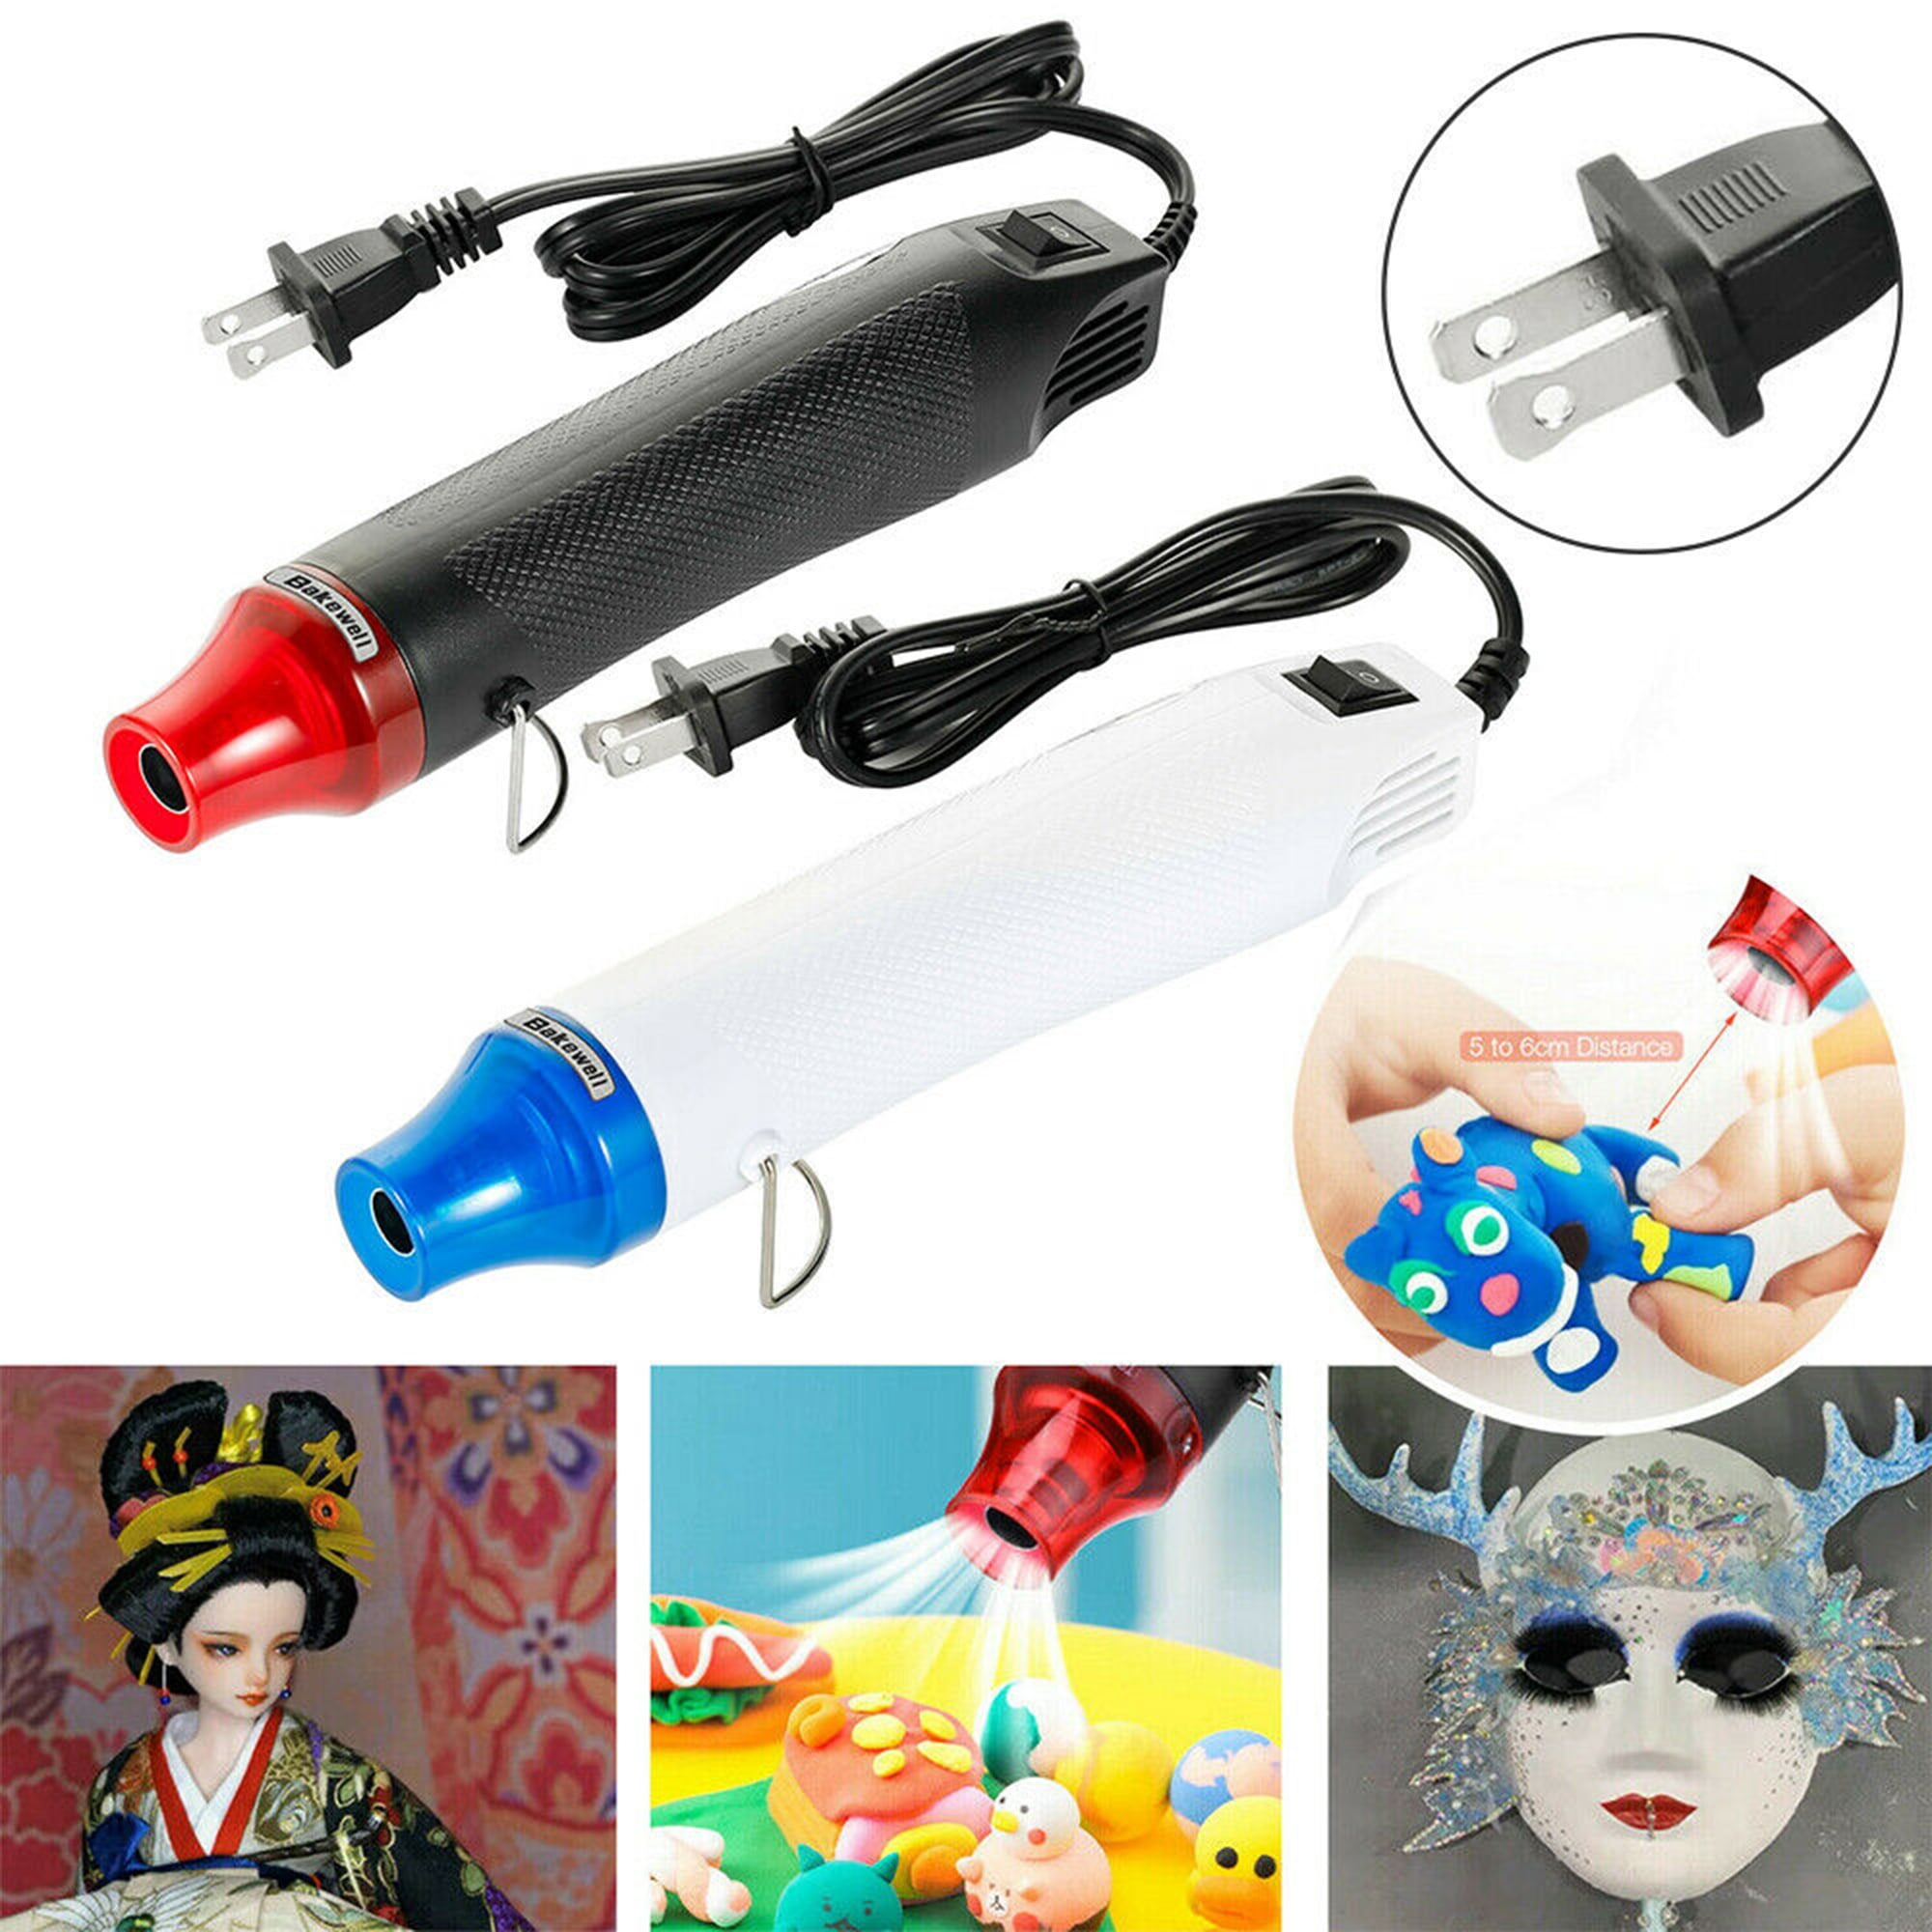 Mini Heat Gun 350W Dual Temp with Silicone Brush (x2), Mini Handheld Hot  Air Gun for DIY Craft Embossing, Shrink Wrapping, Drying, Candle Making